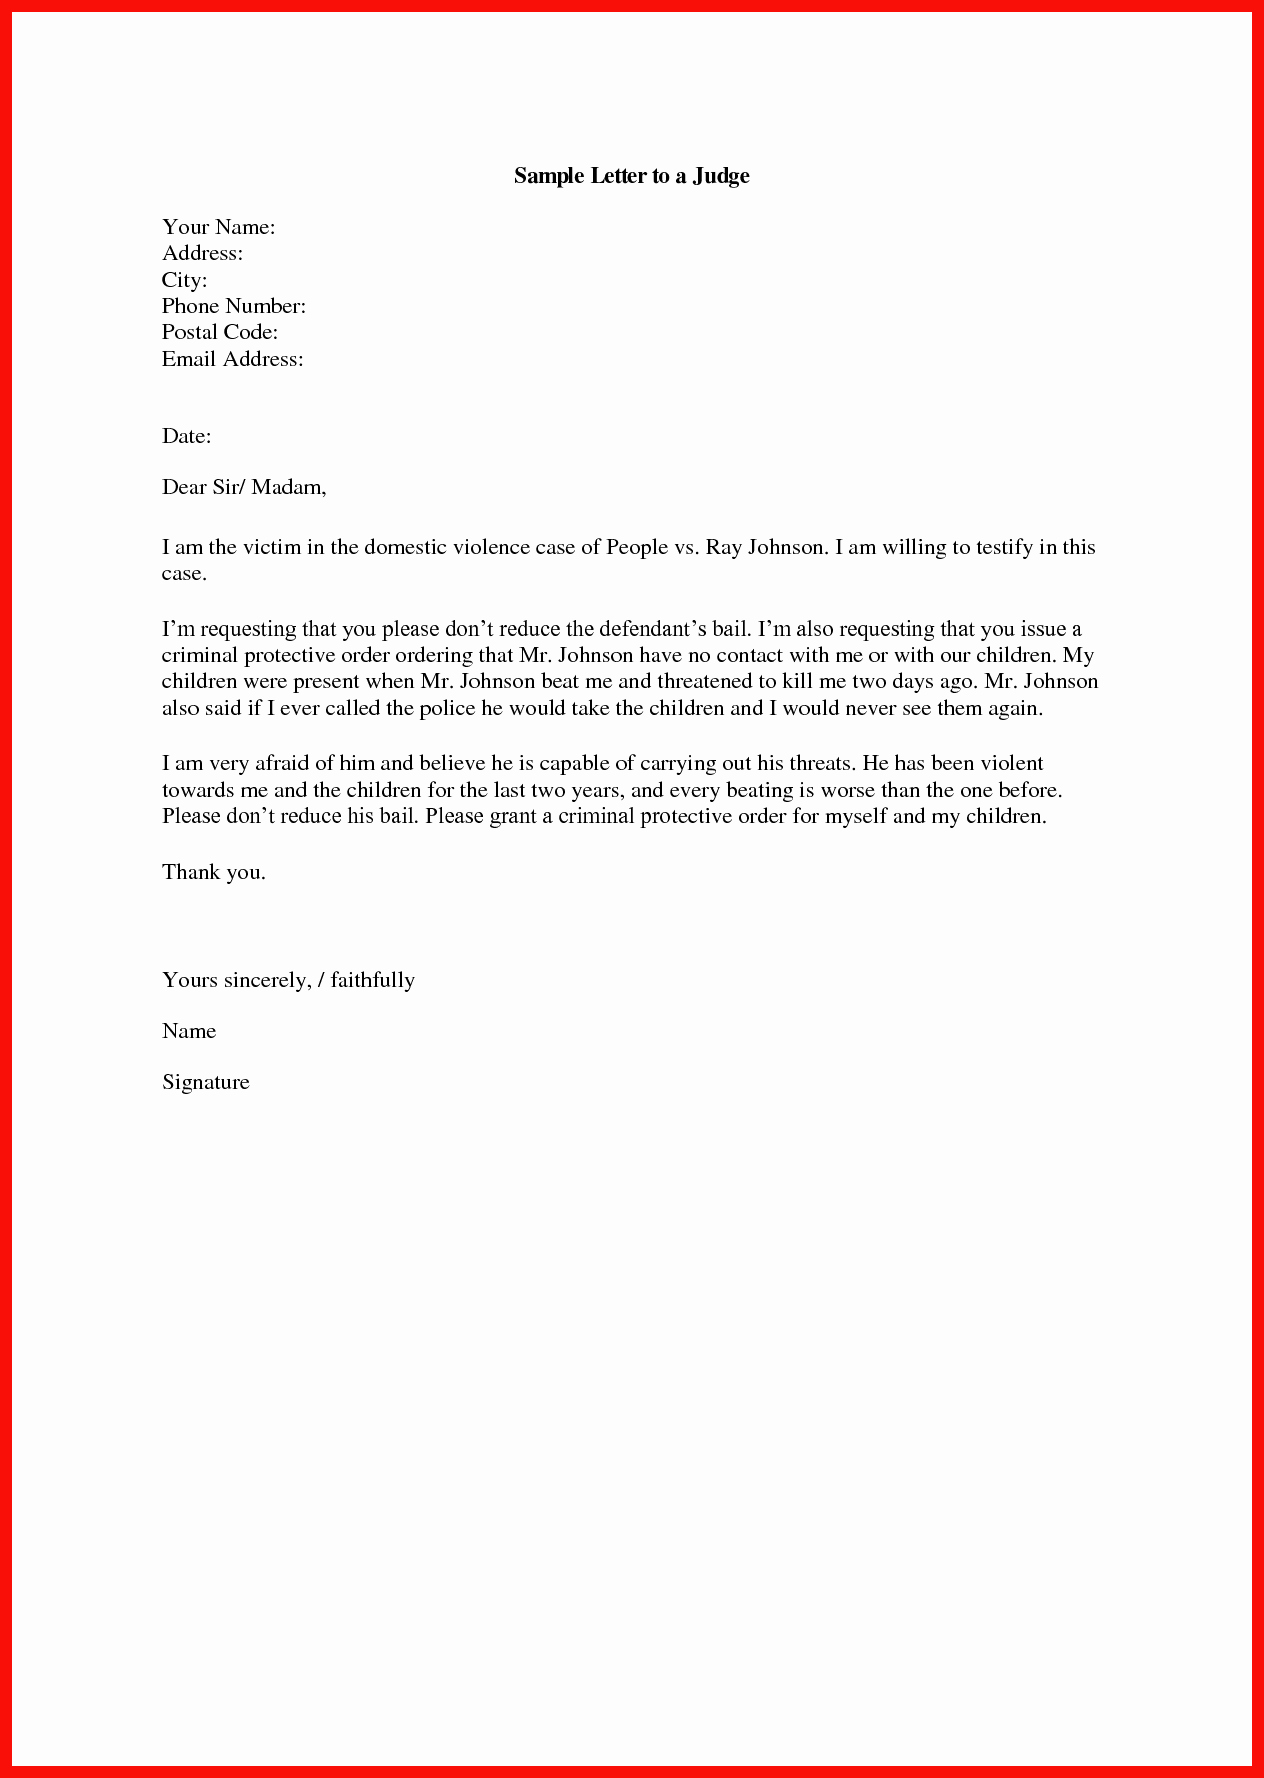 Letter to Judge format Luxury Letter format to A Judge